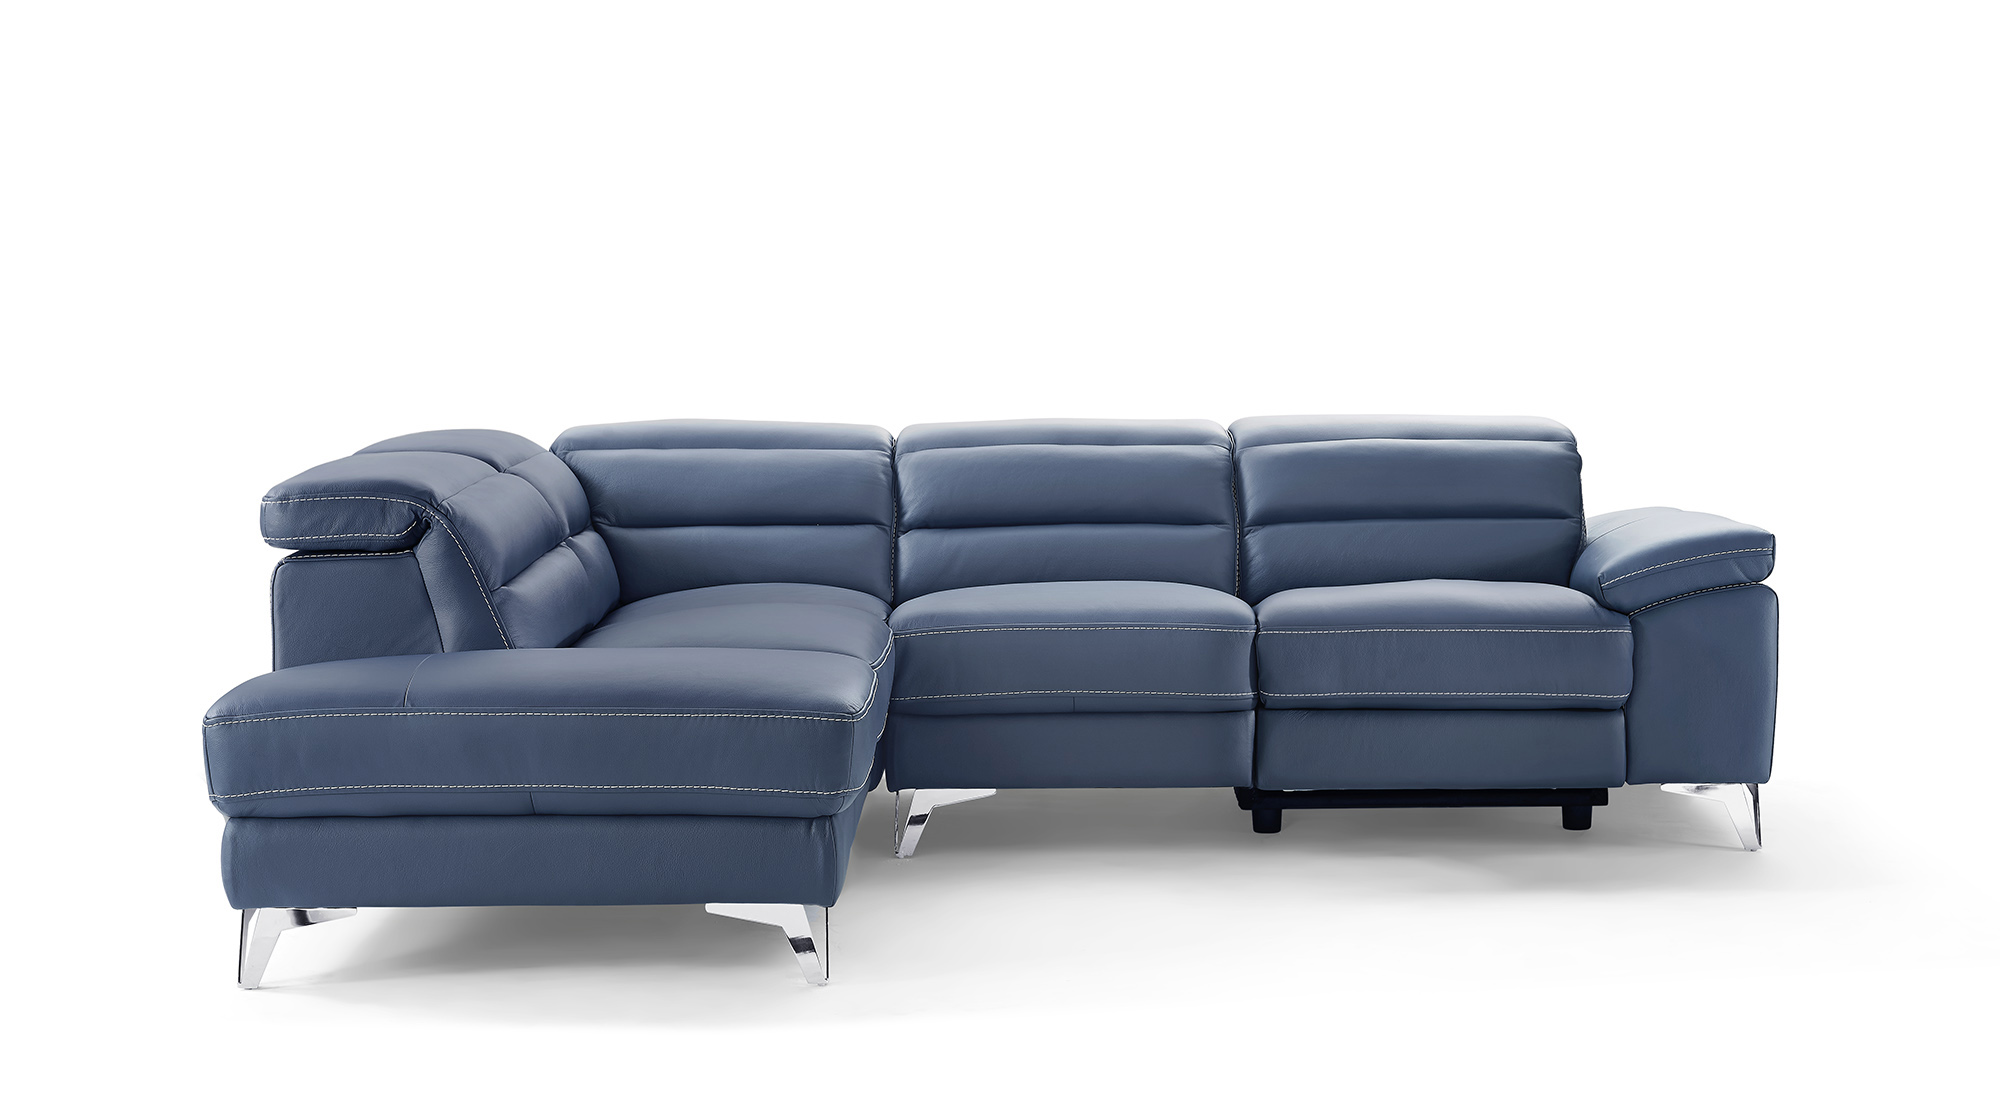 Two Tone Contemporary Style Sleek Quality Full Leather Couch